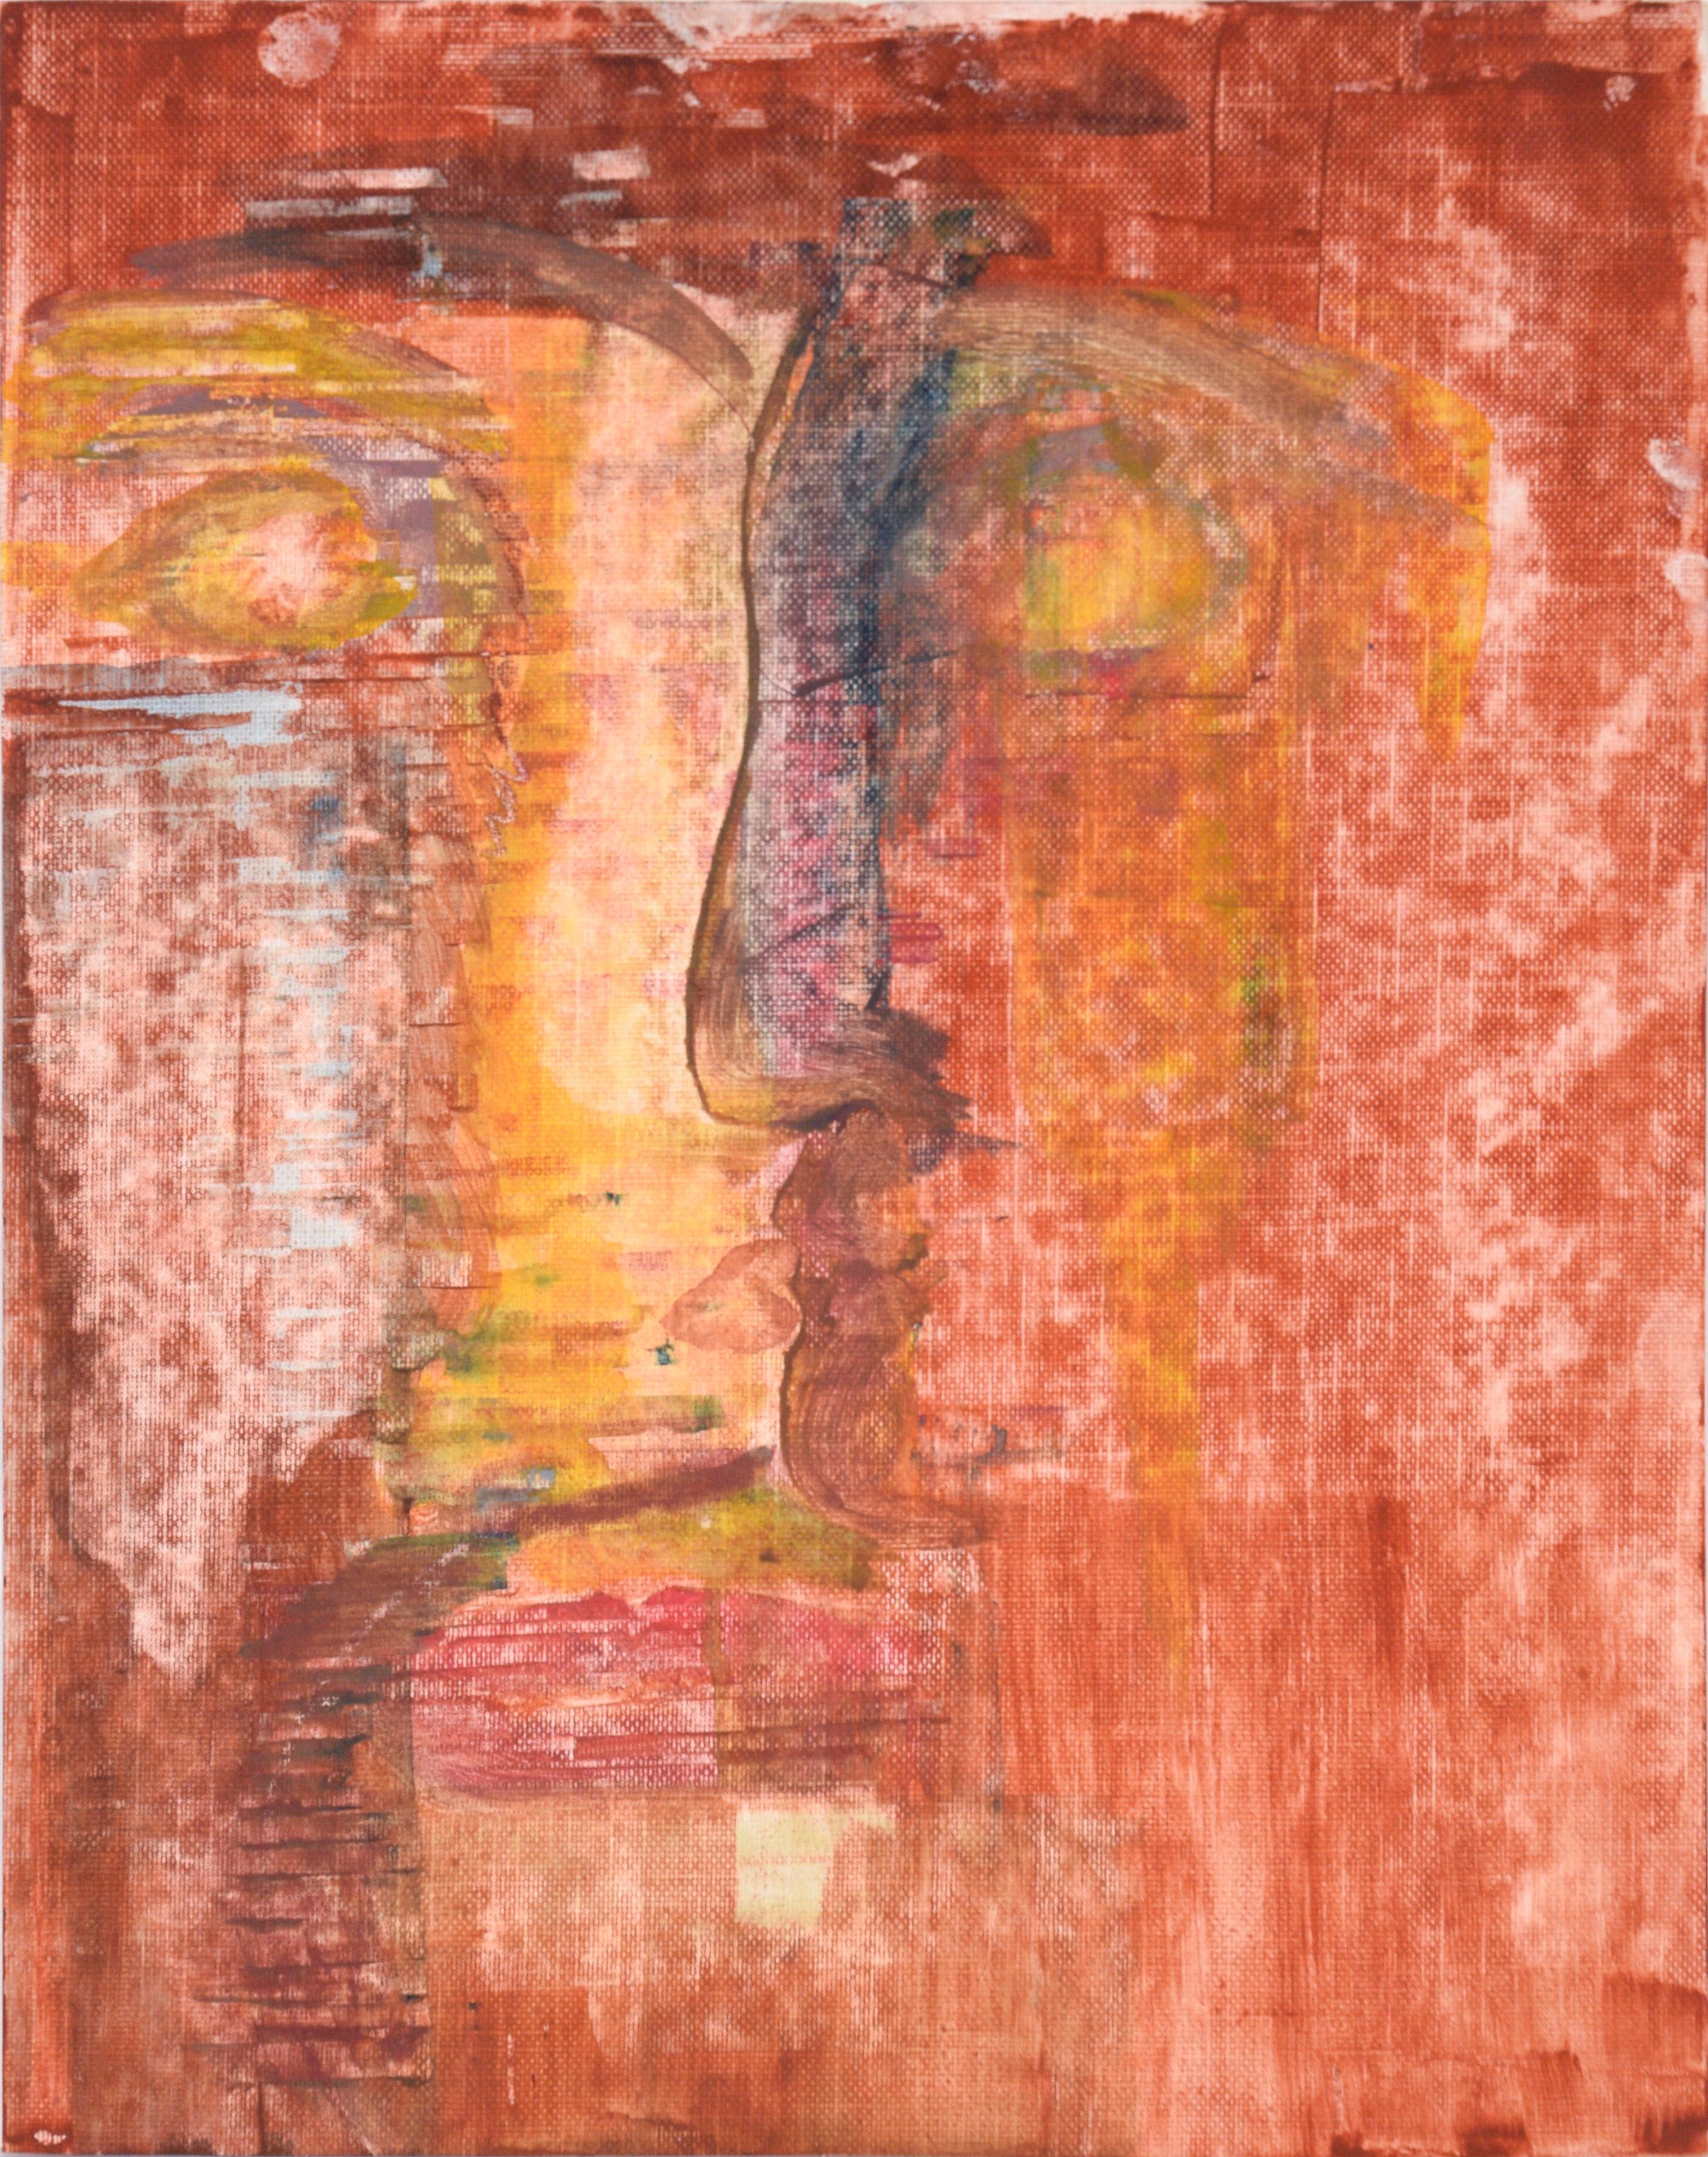 Ricardo de Silva Figurative Painting - Stone Faces Buddha - Abstract Portrait in Acrylic on Textured Paper